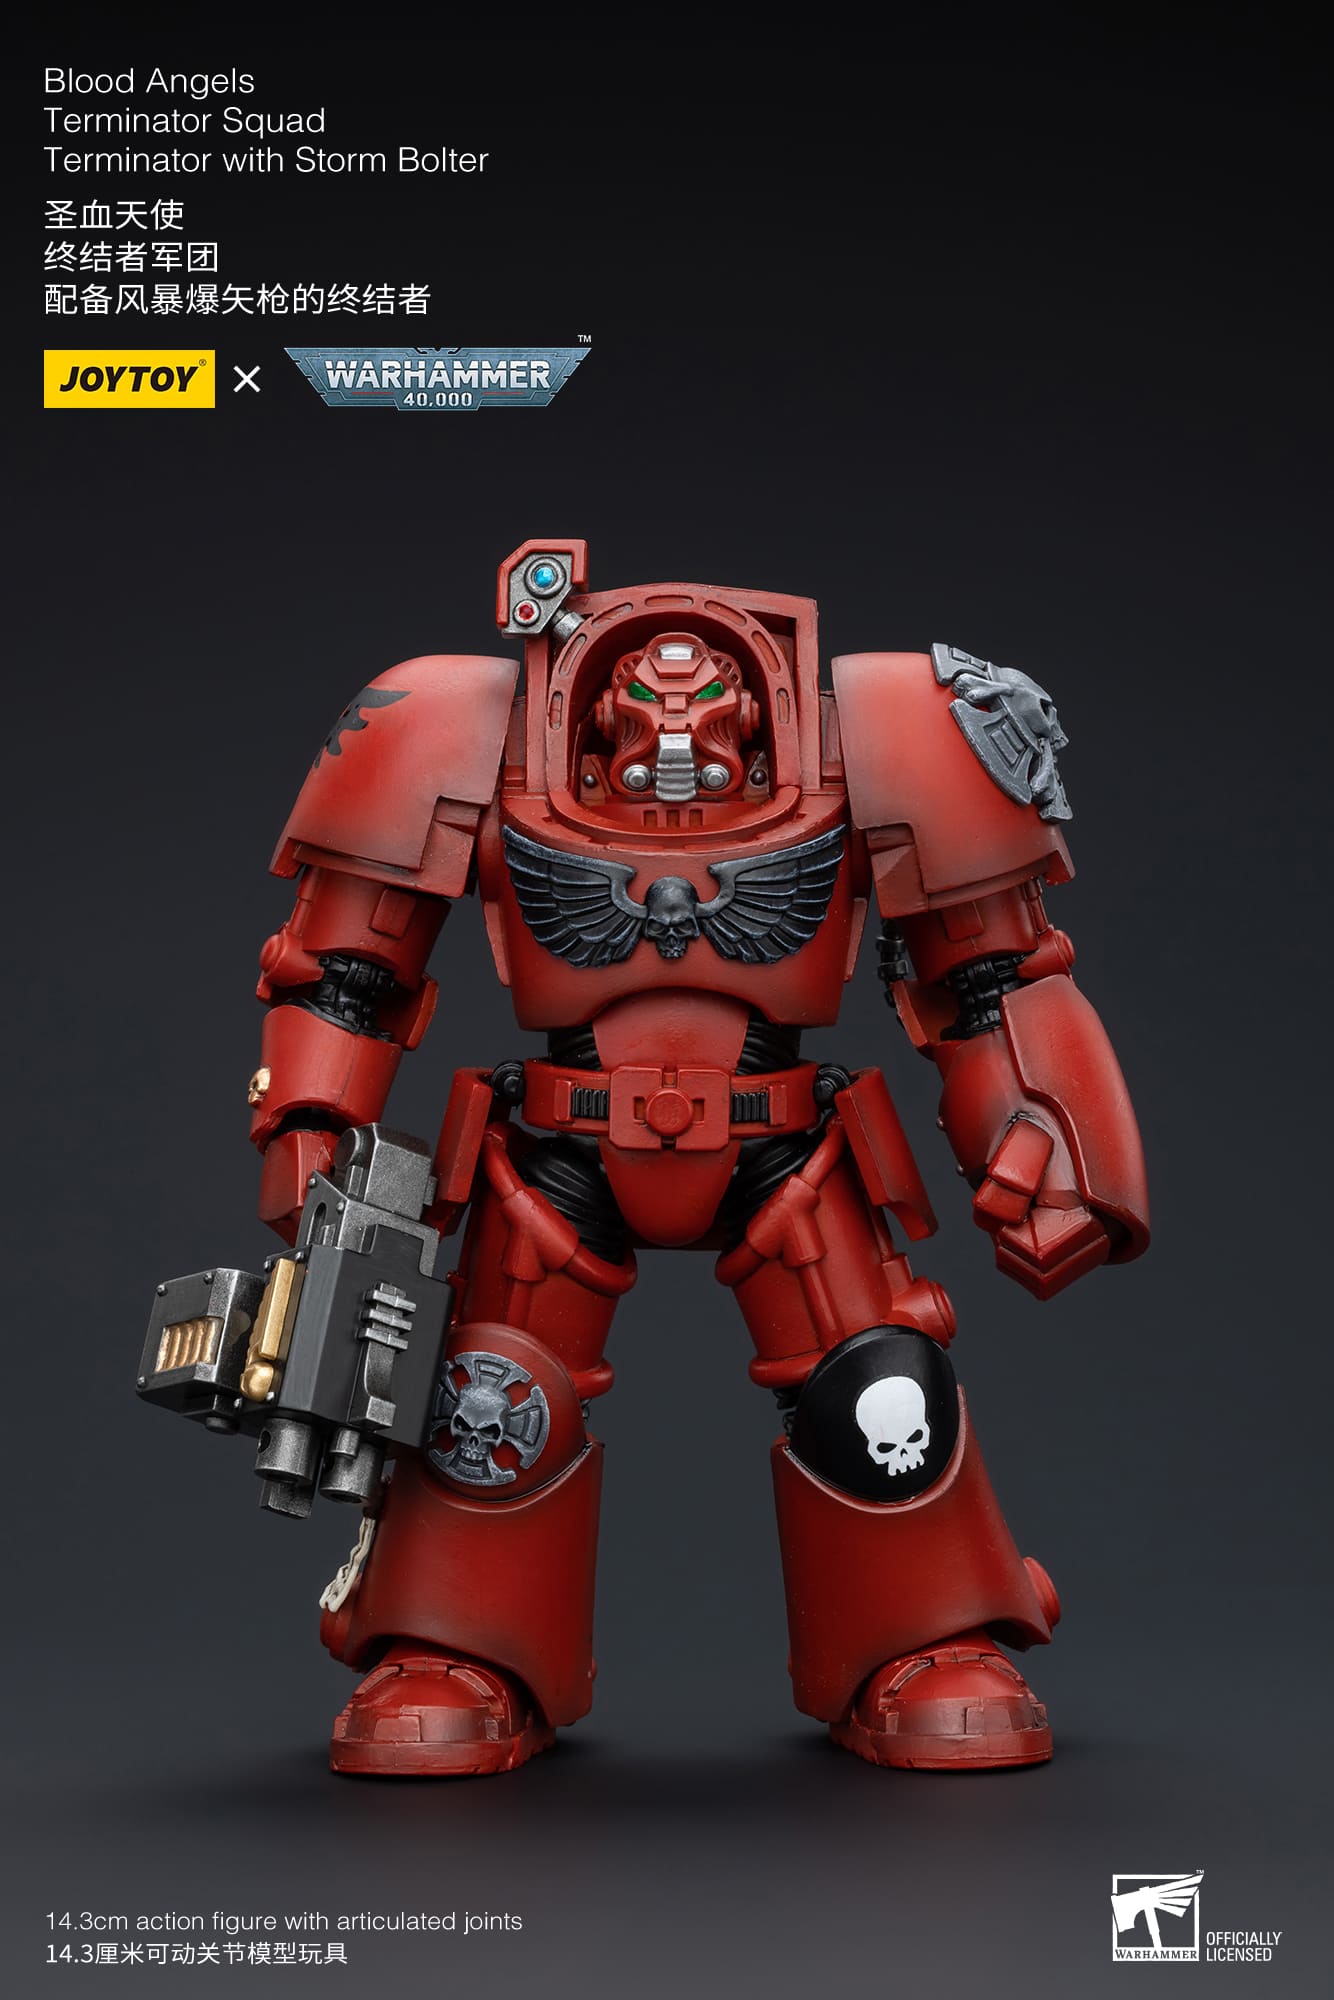 JoyToy WH40K Blood Angels Terminator Squad Terminator with Storm Bolter 2